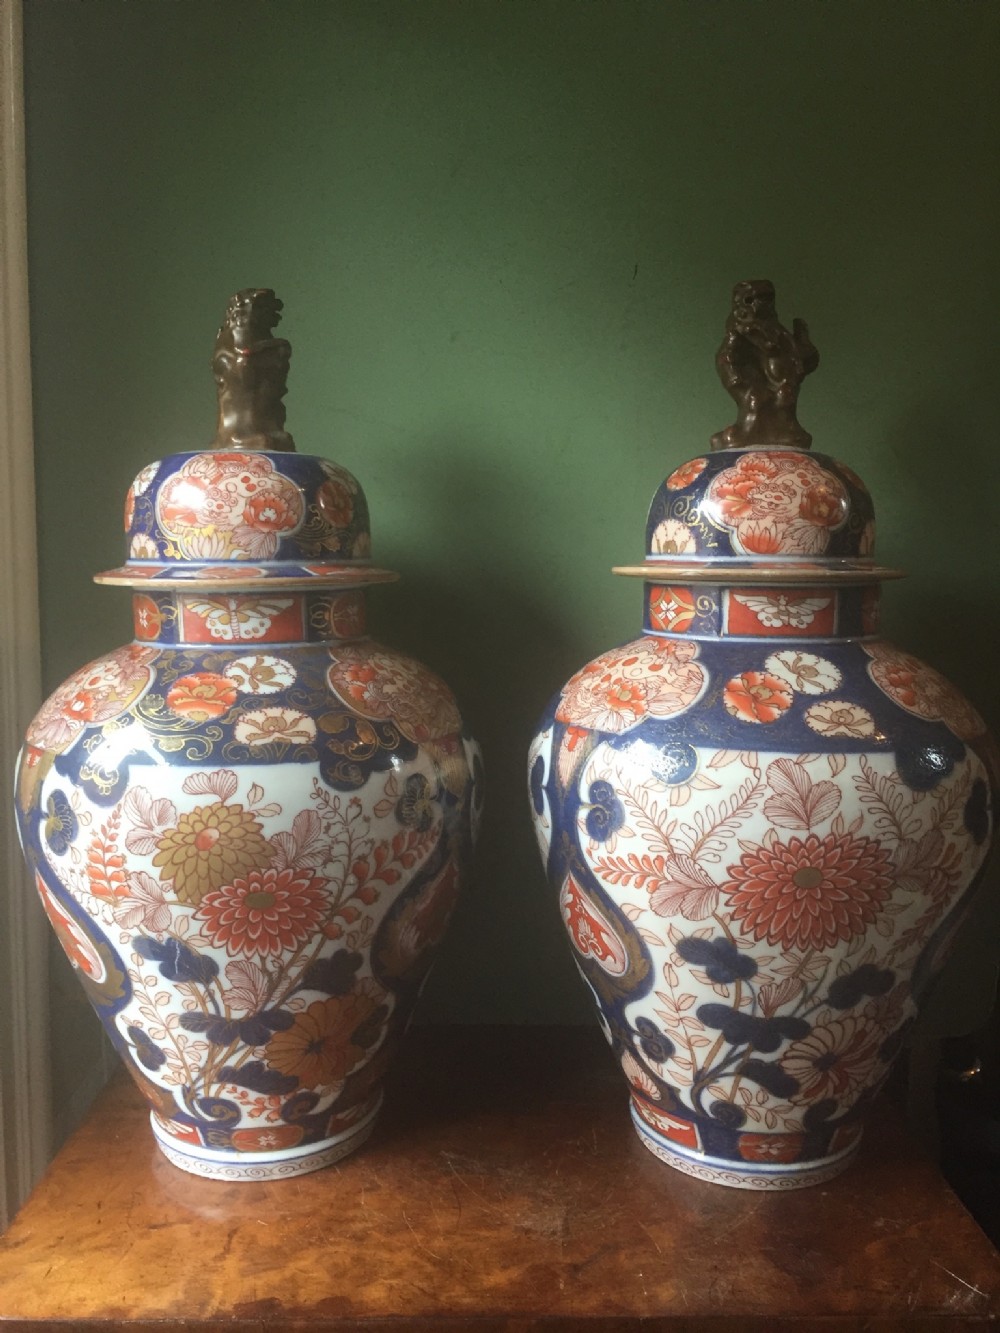 fine pair of c18th japanese imari pattern porcelain vases and covers